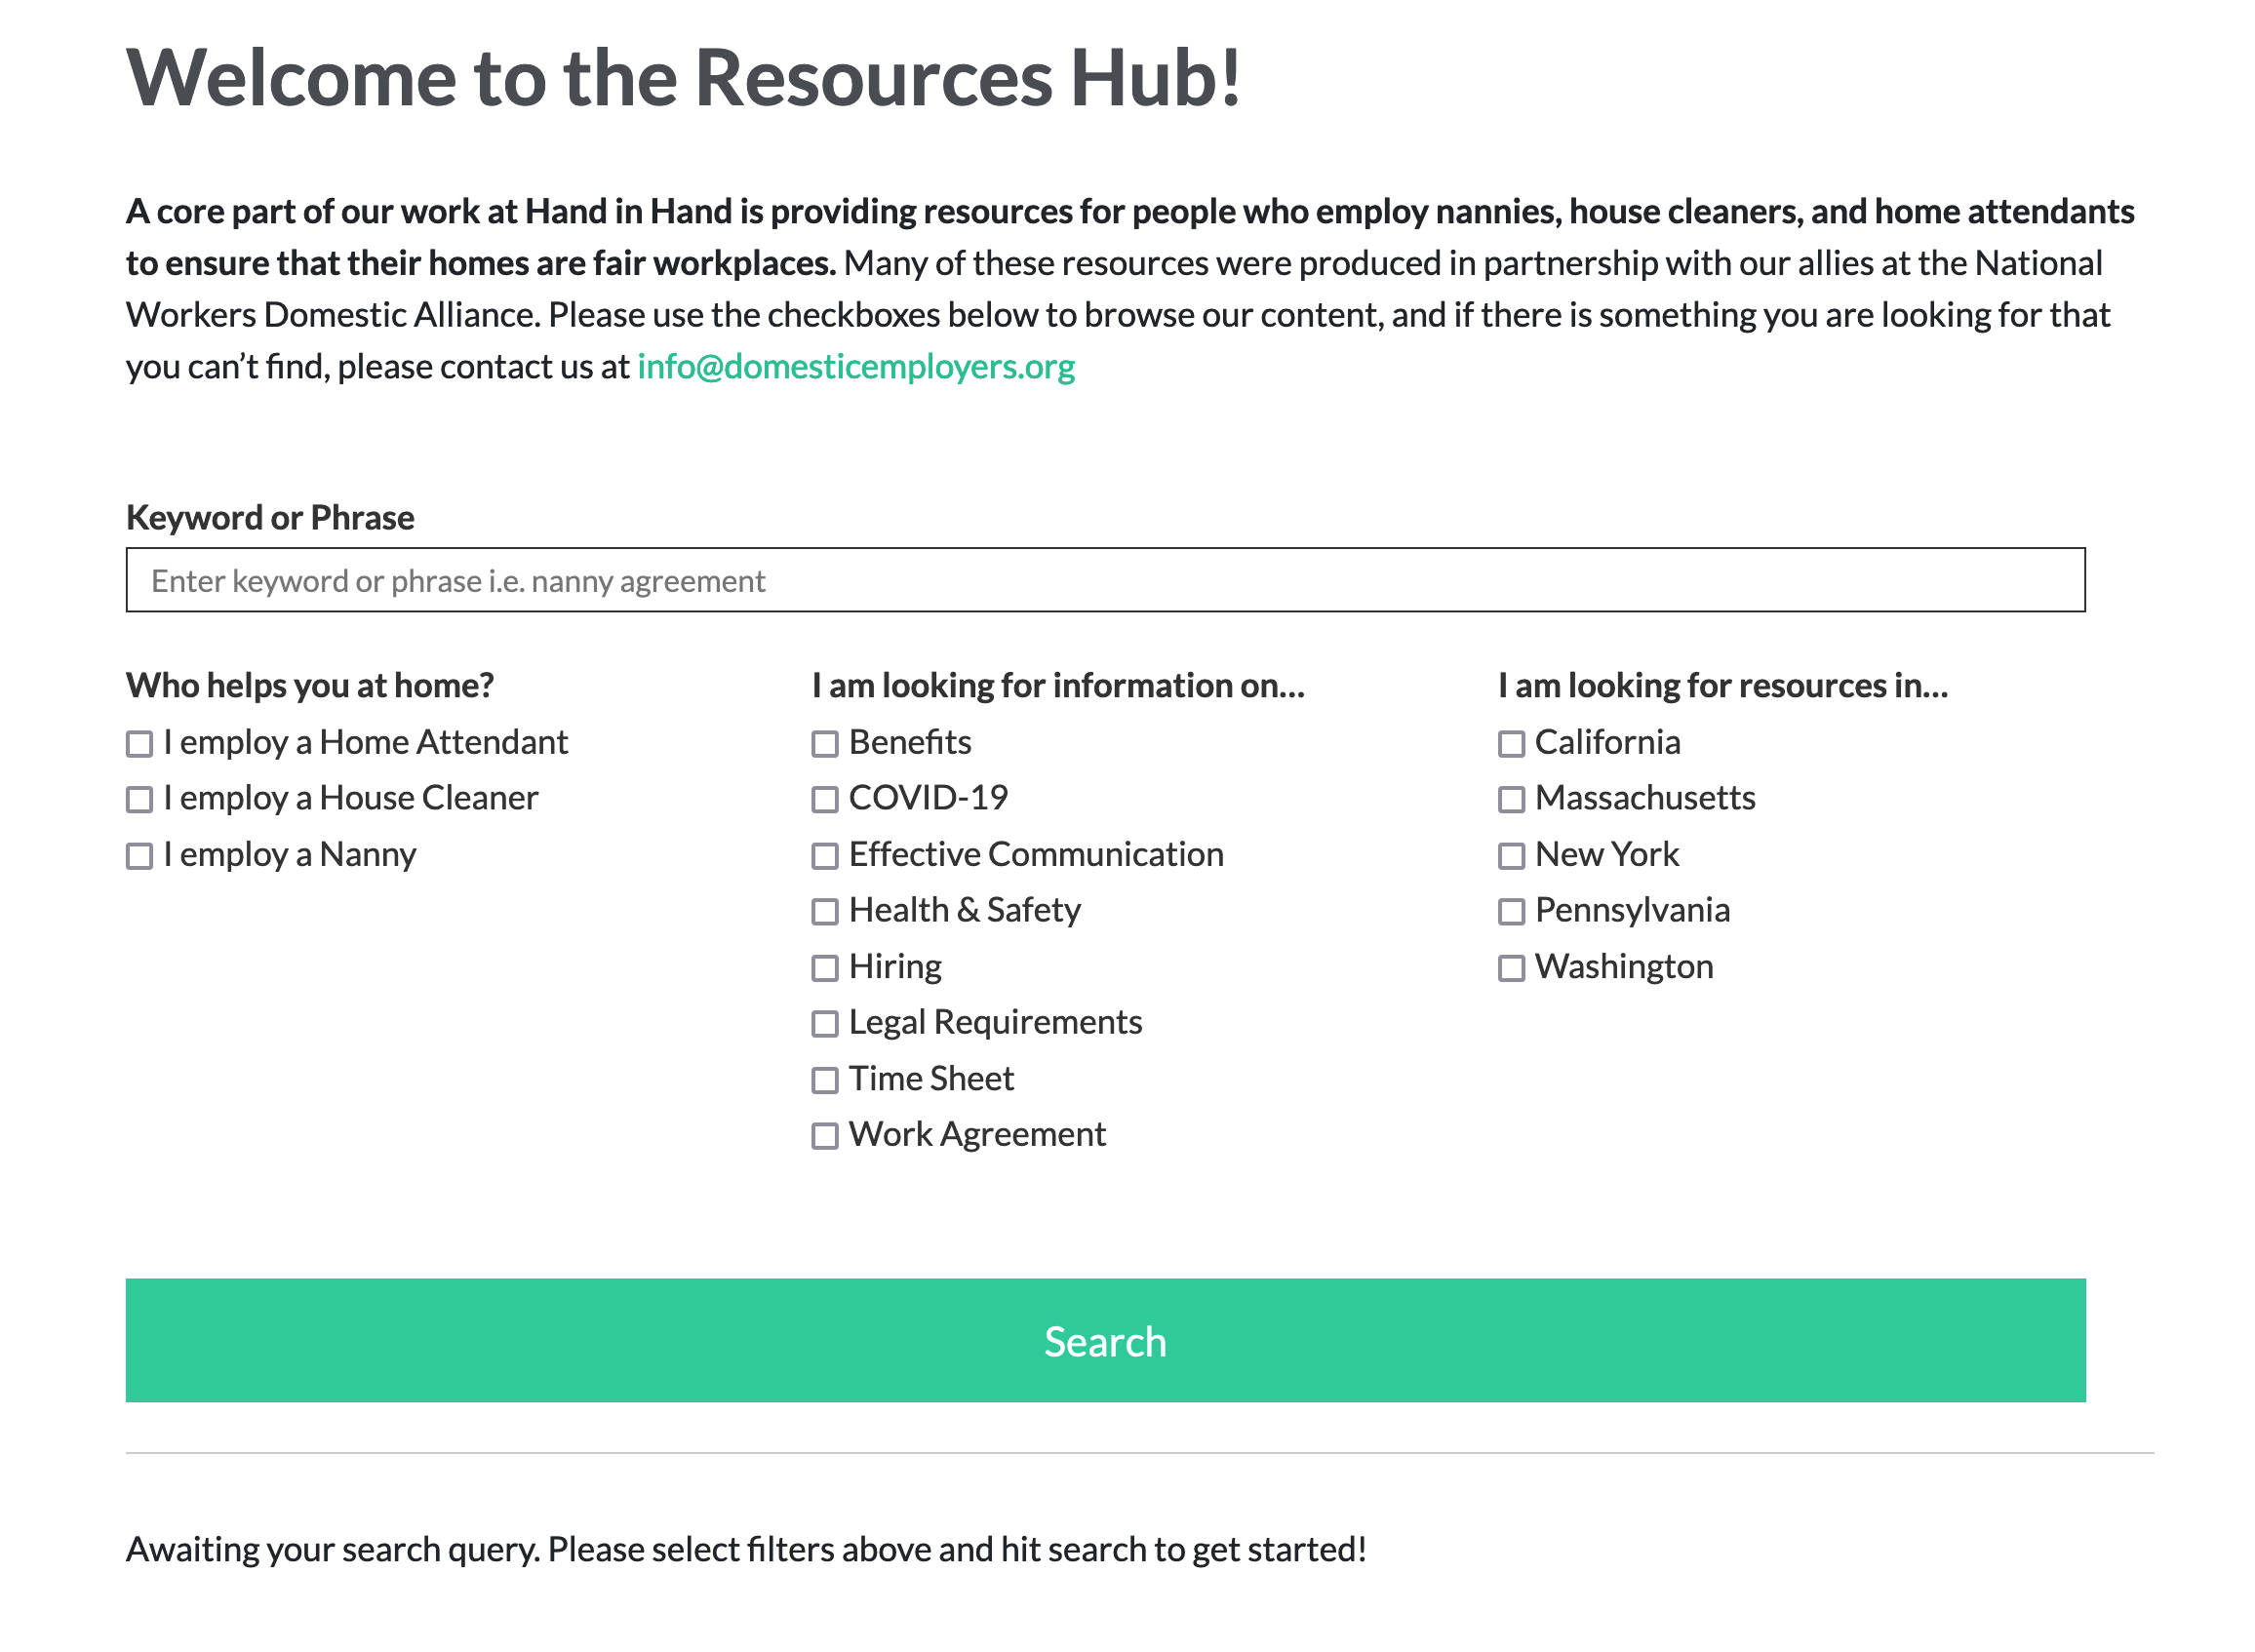 Hand in Hand: Domestic Employers Network: Advanced Search and Filtering for Resources